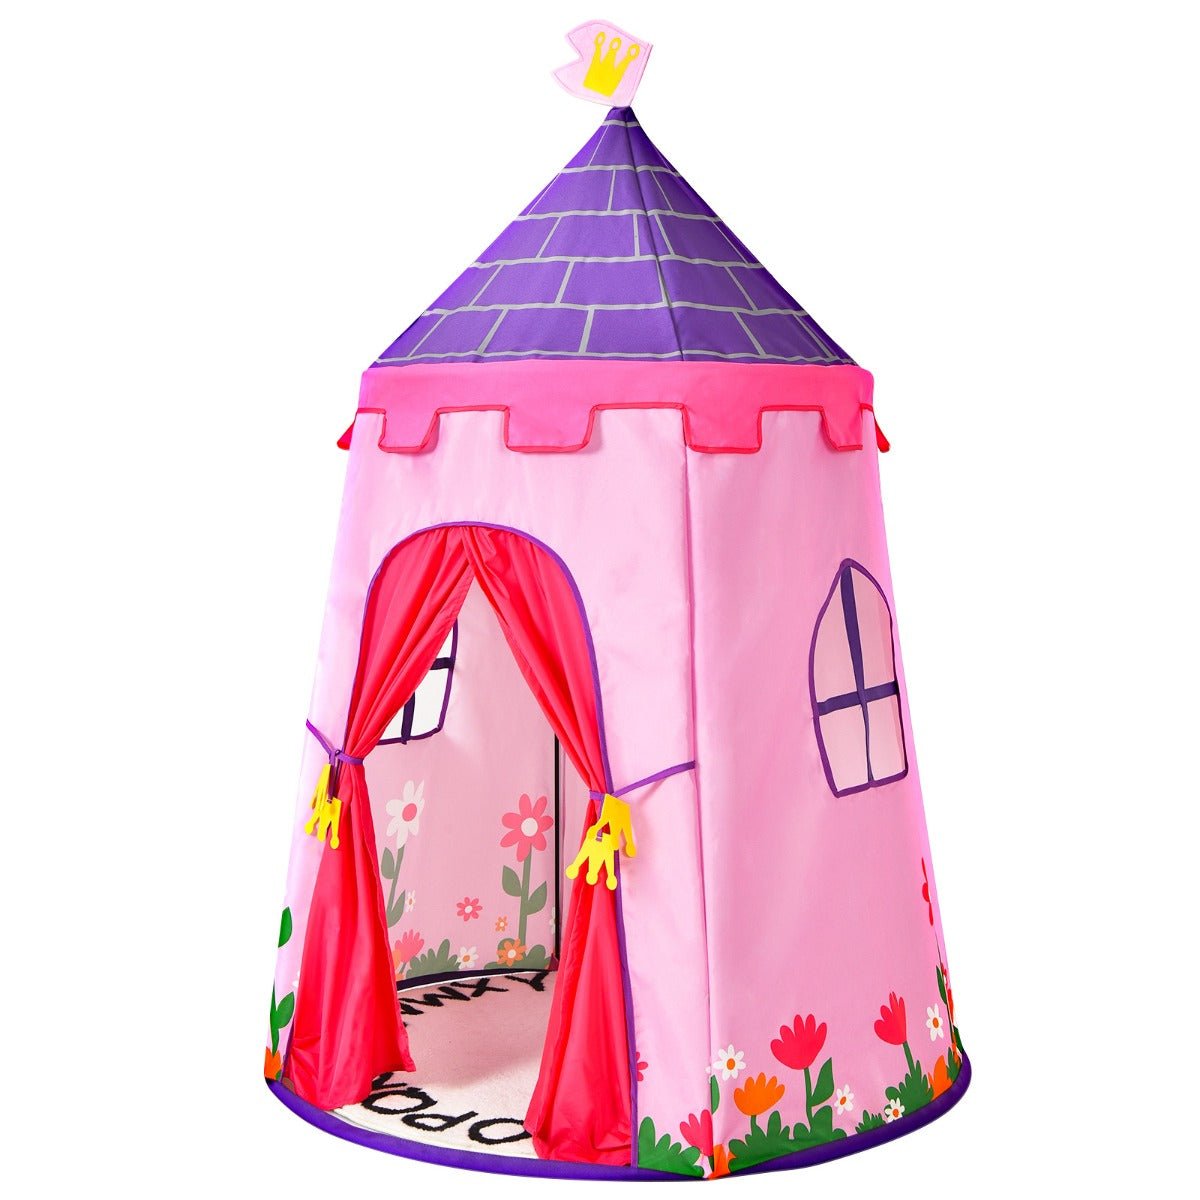 Imaginative Play: Kids Portable Playhouse Castle with Carry Bag